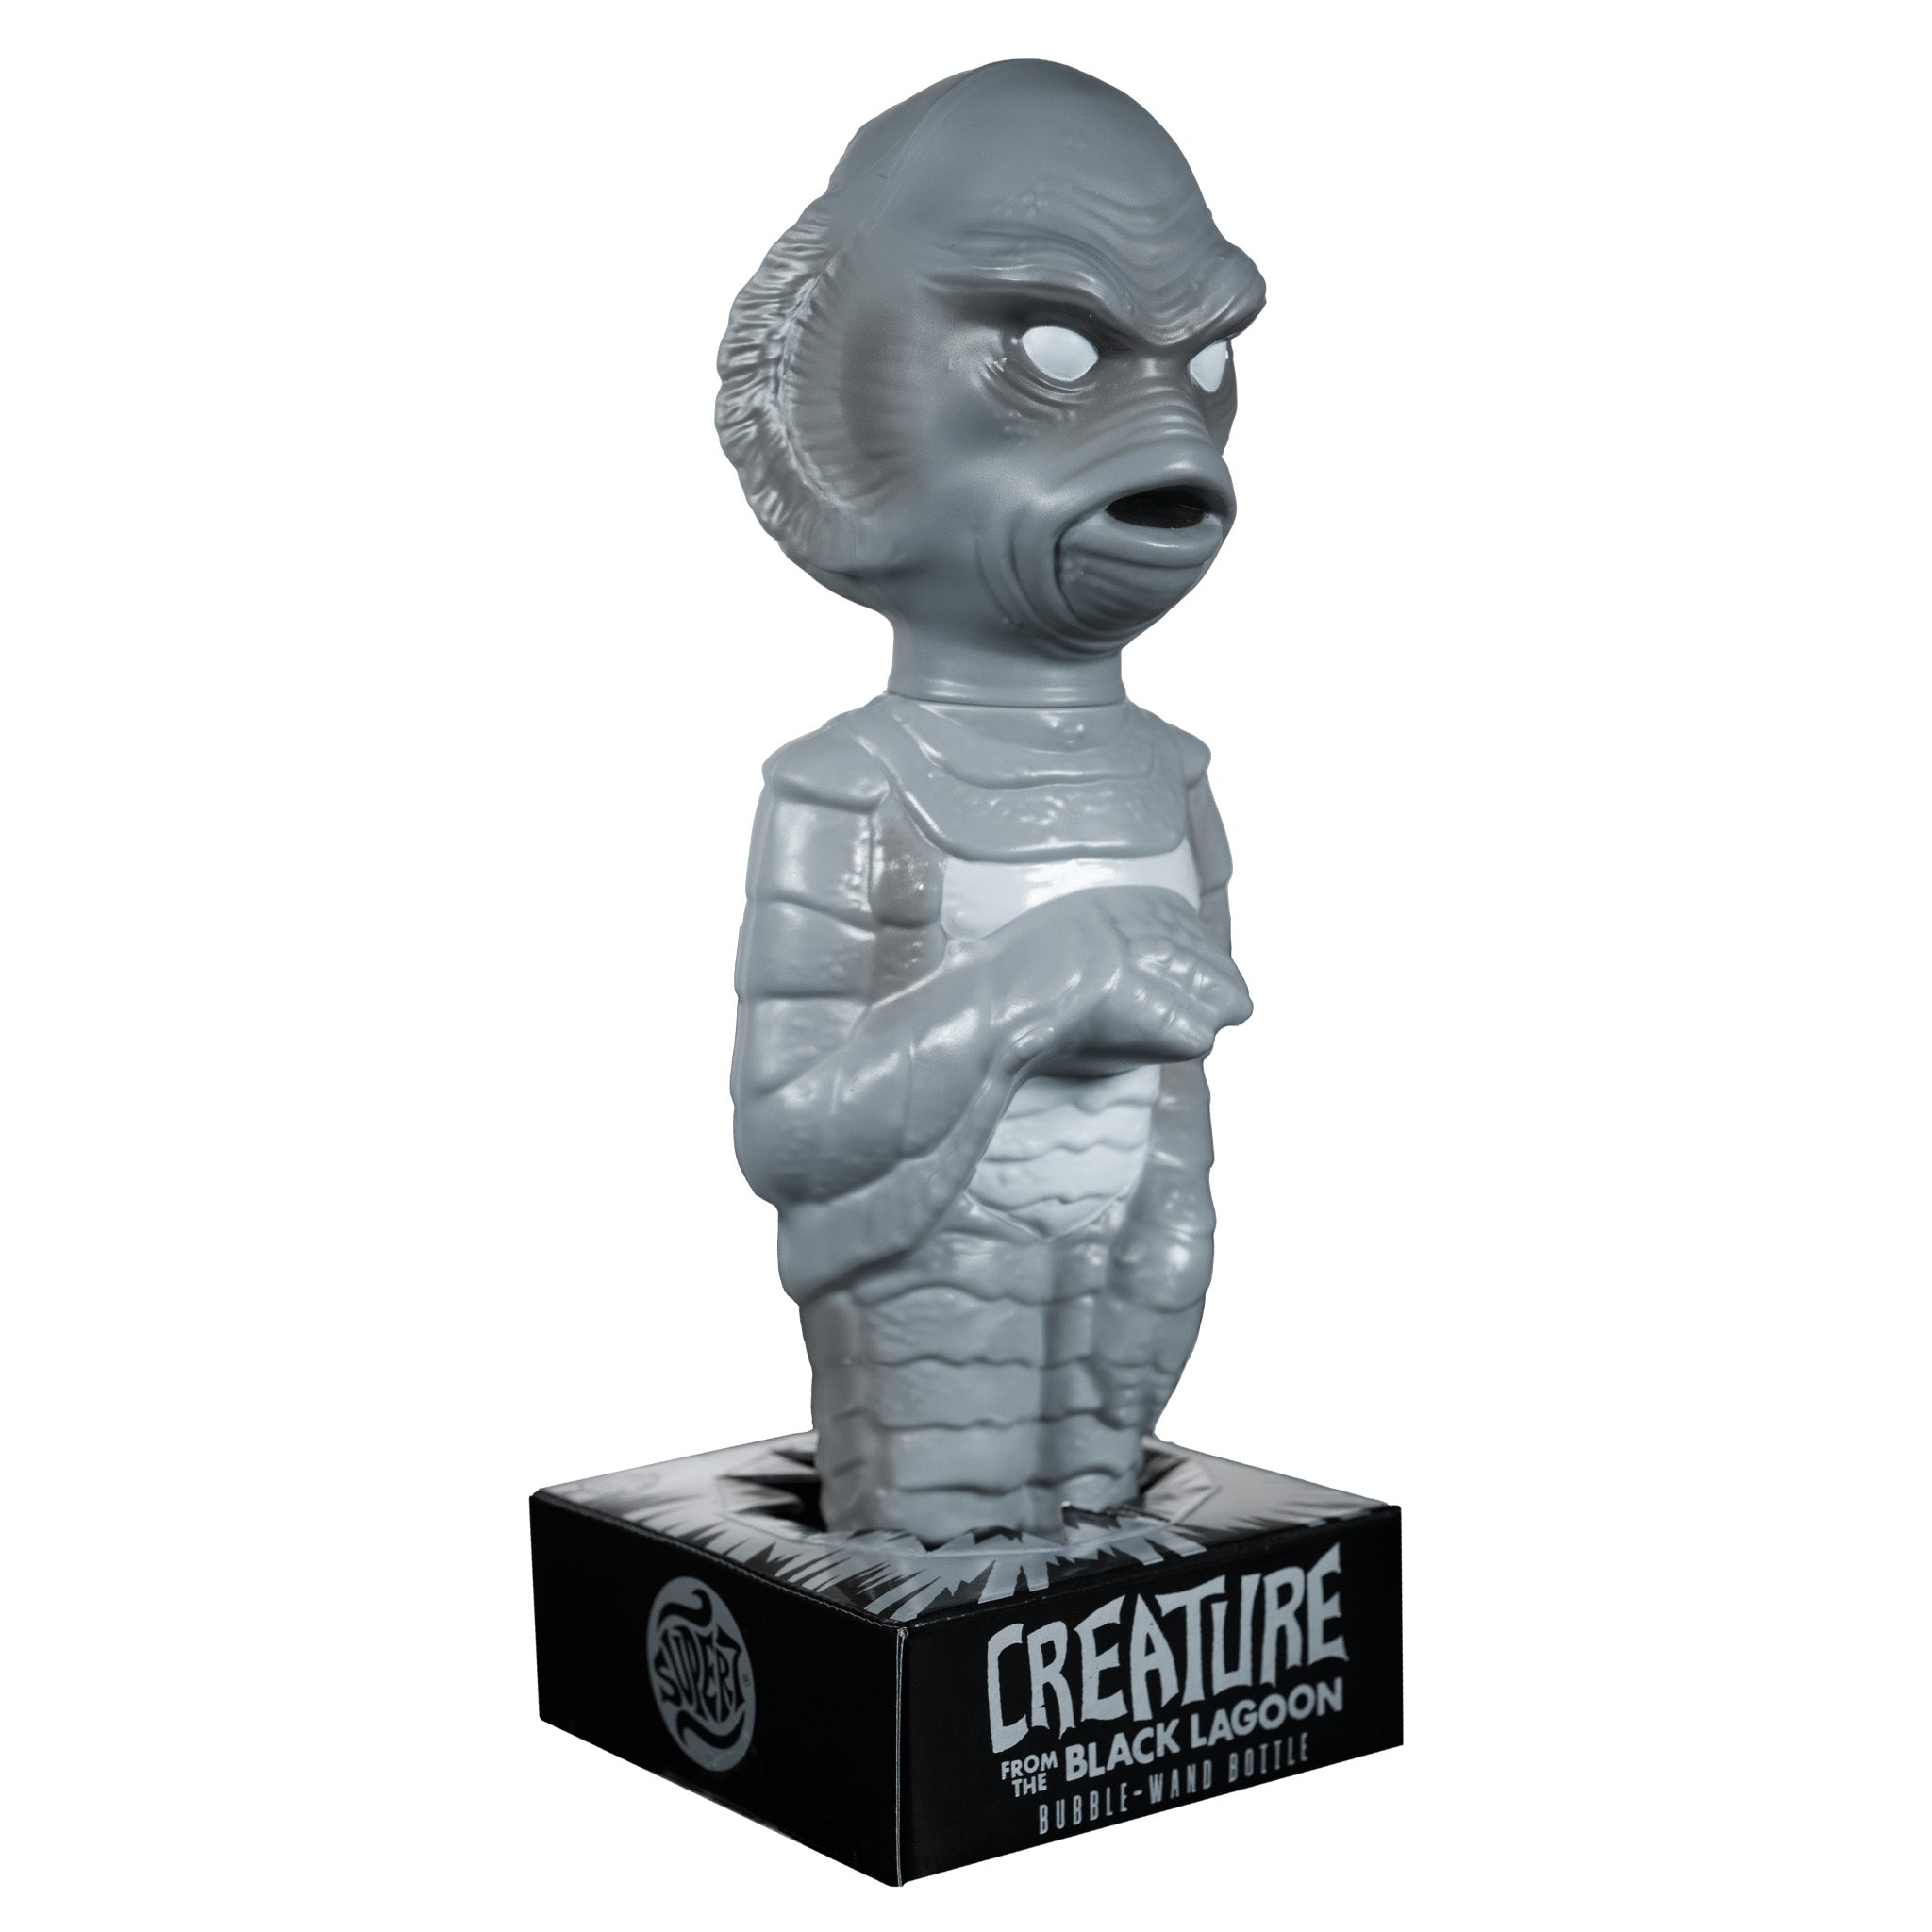 Universal Monsters Super Soapies Wave 4 - Creature from the Black Lagoon (Silver Screen)